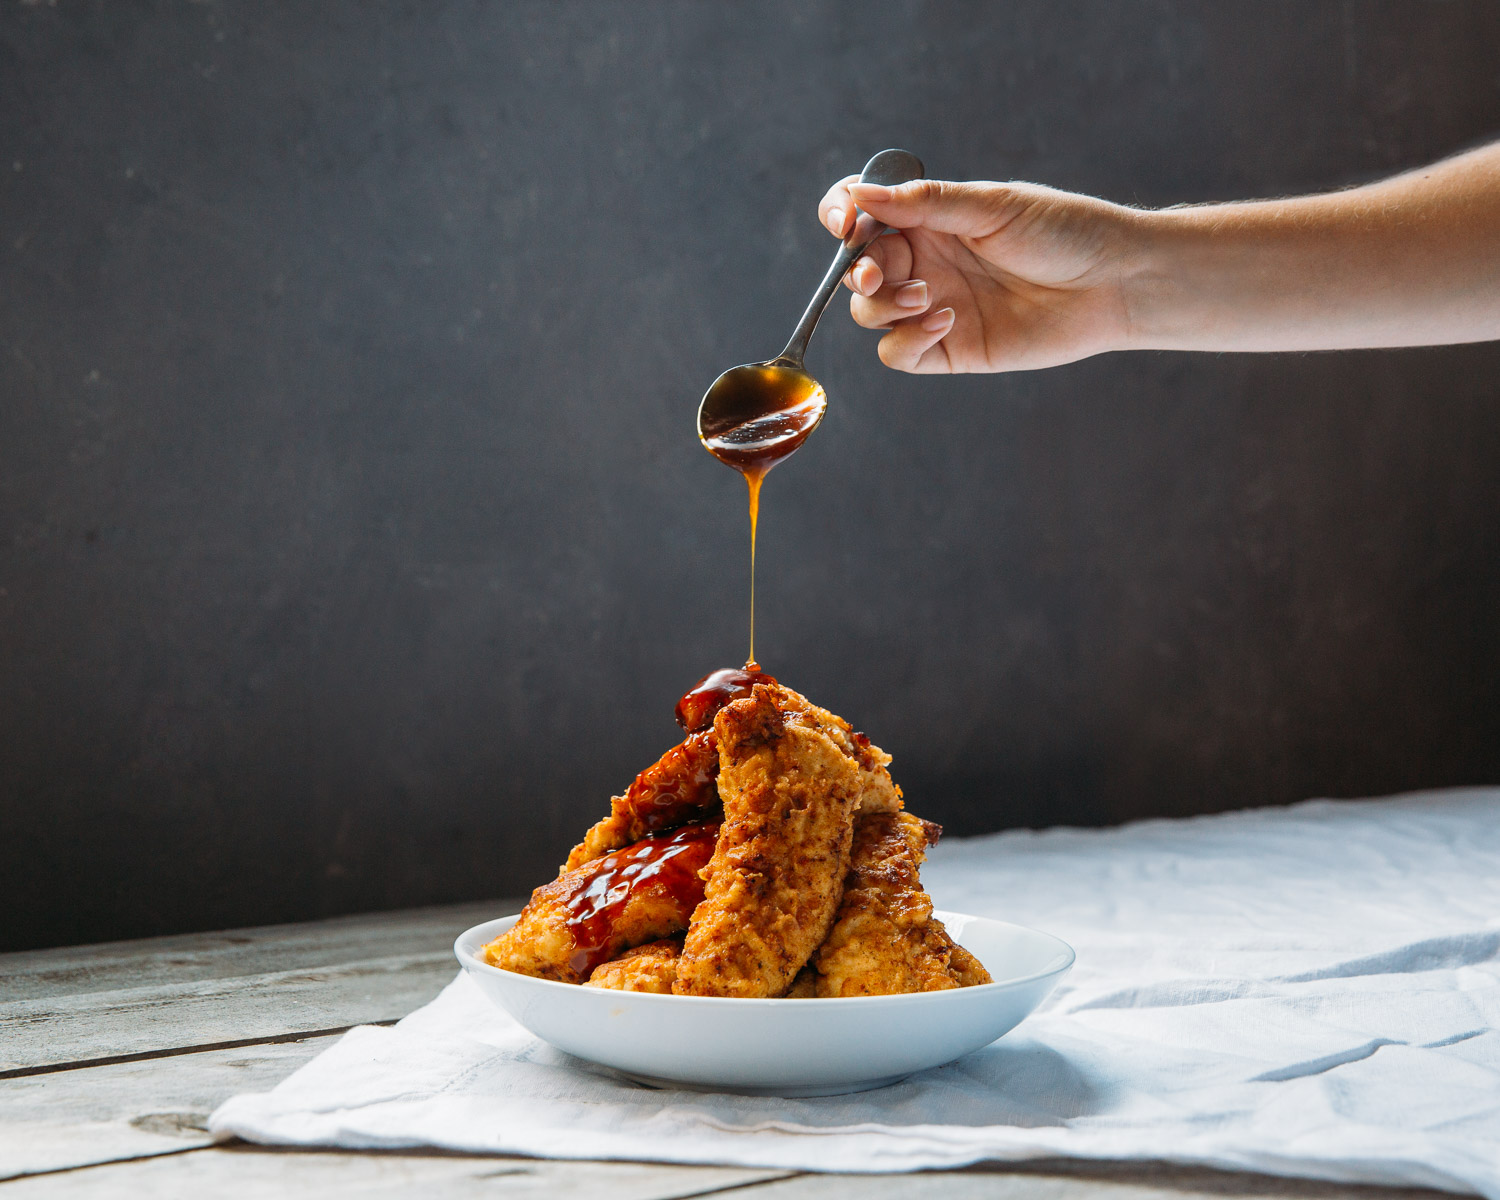 Serve up some fried beauty at your next dinner or get-together and relish in the many flavors.